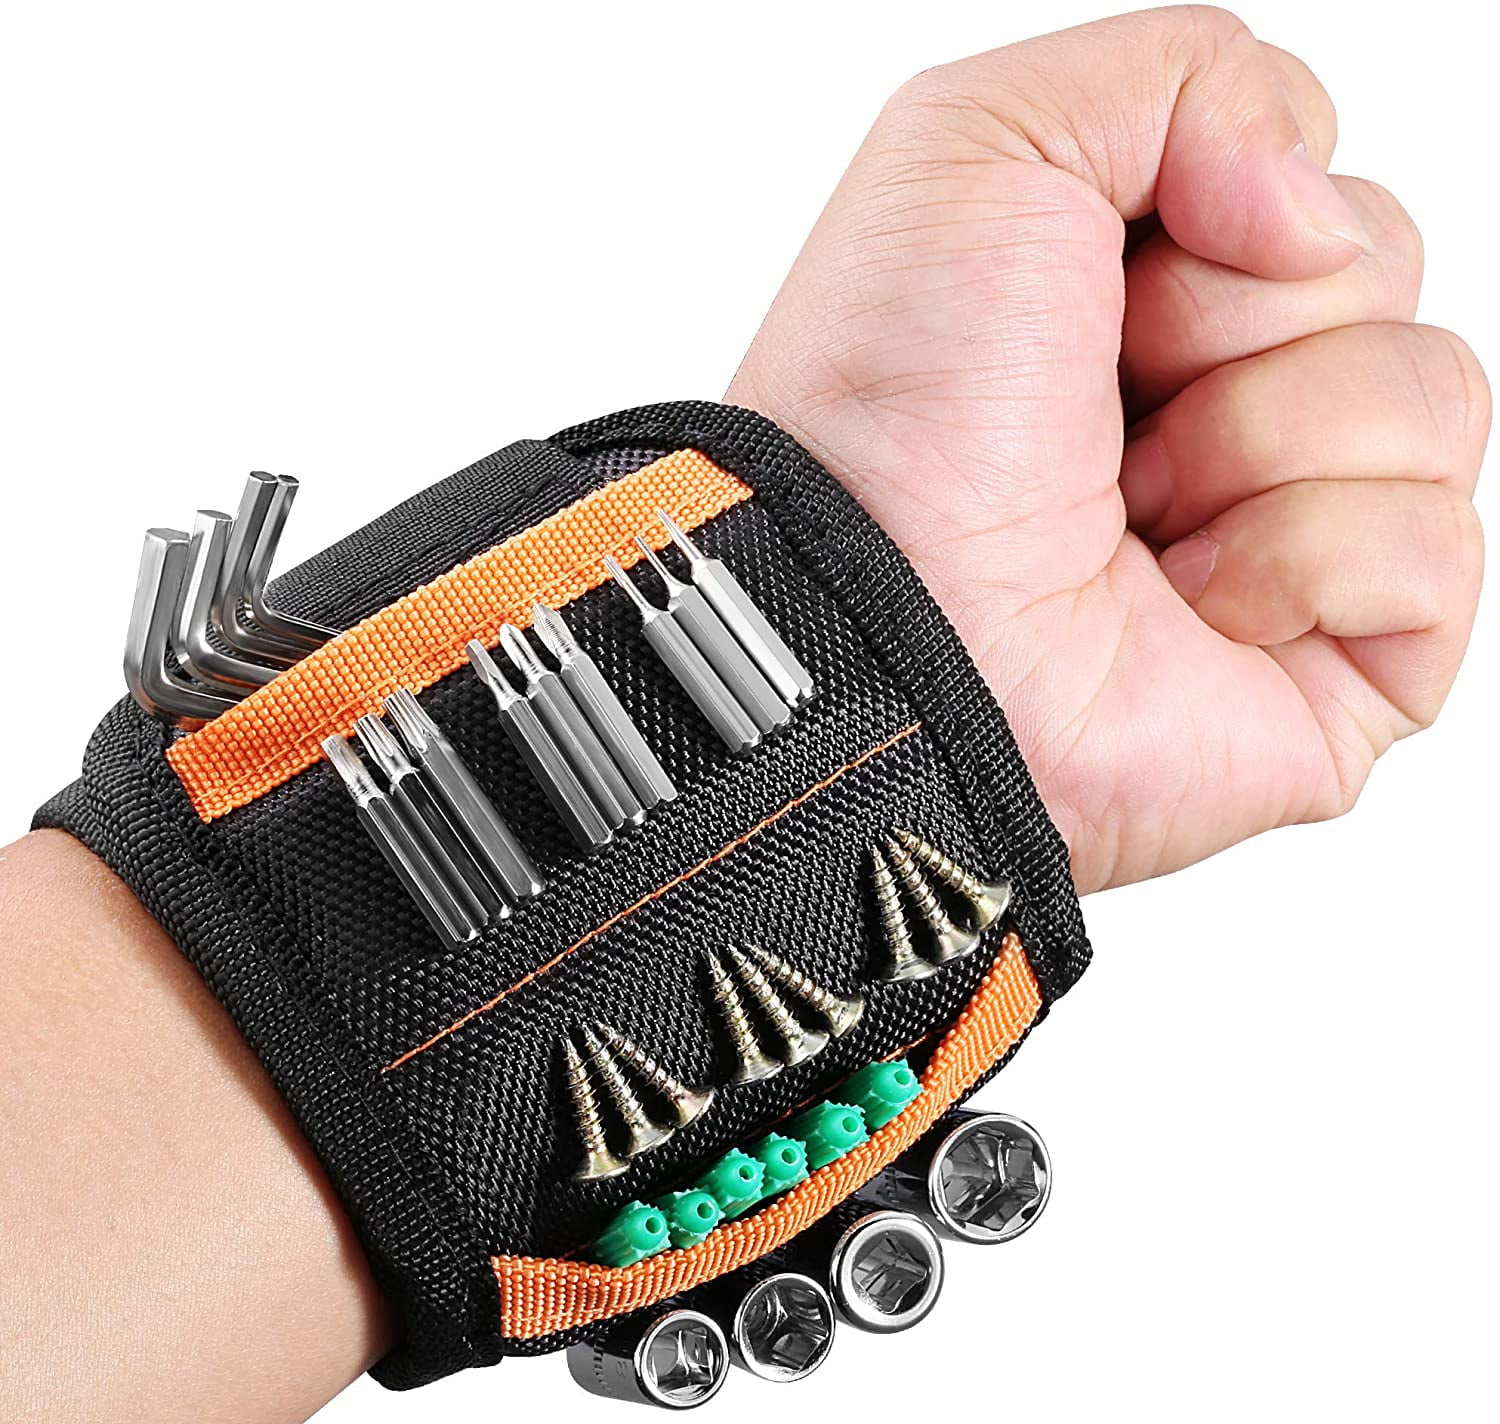 etc sticks to nails screws Magnetic Wrist Band for easy access to metal parts 